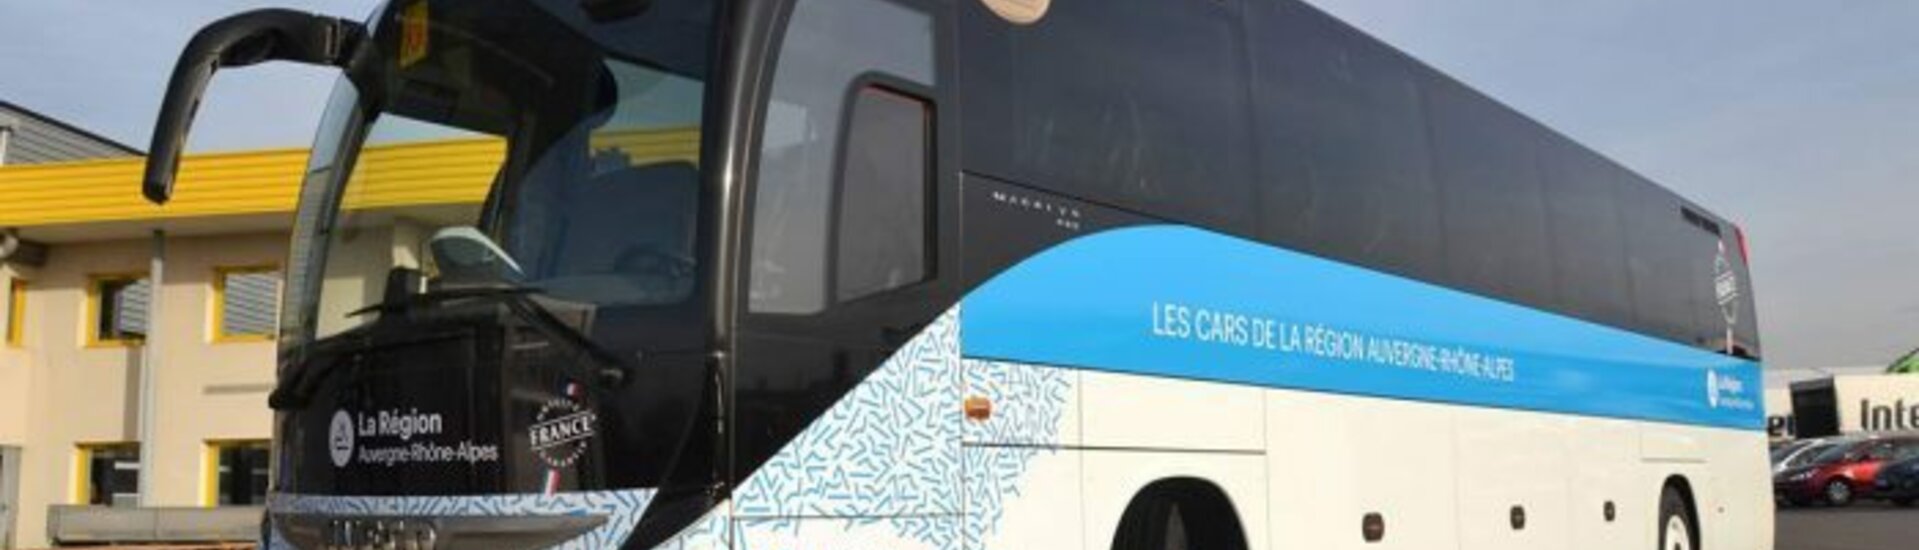 Transports scolaires